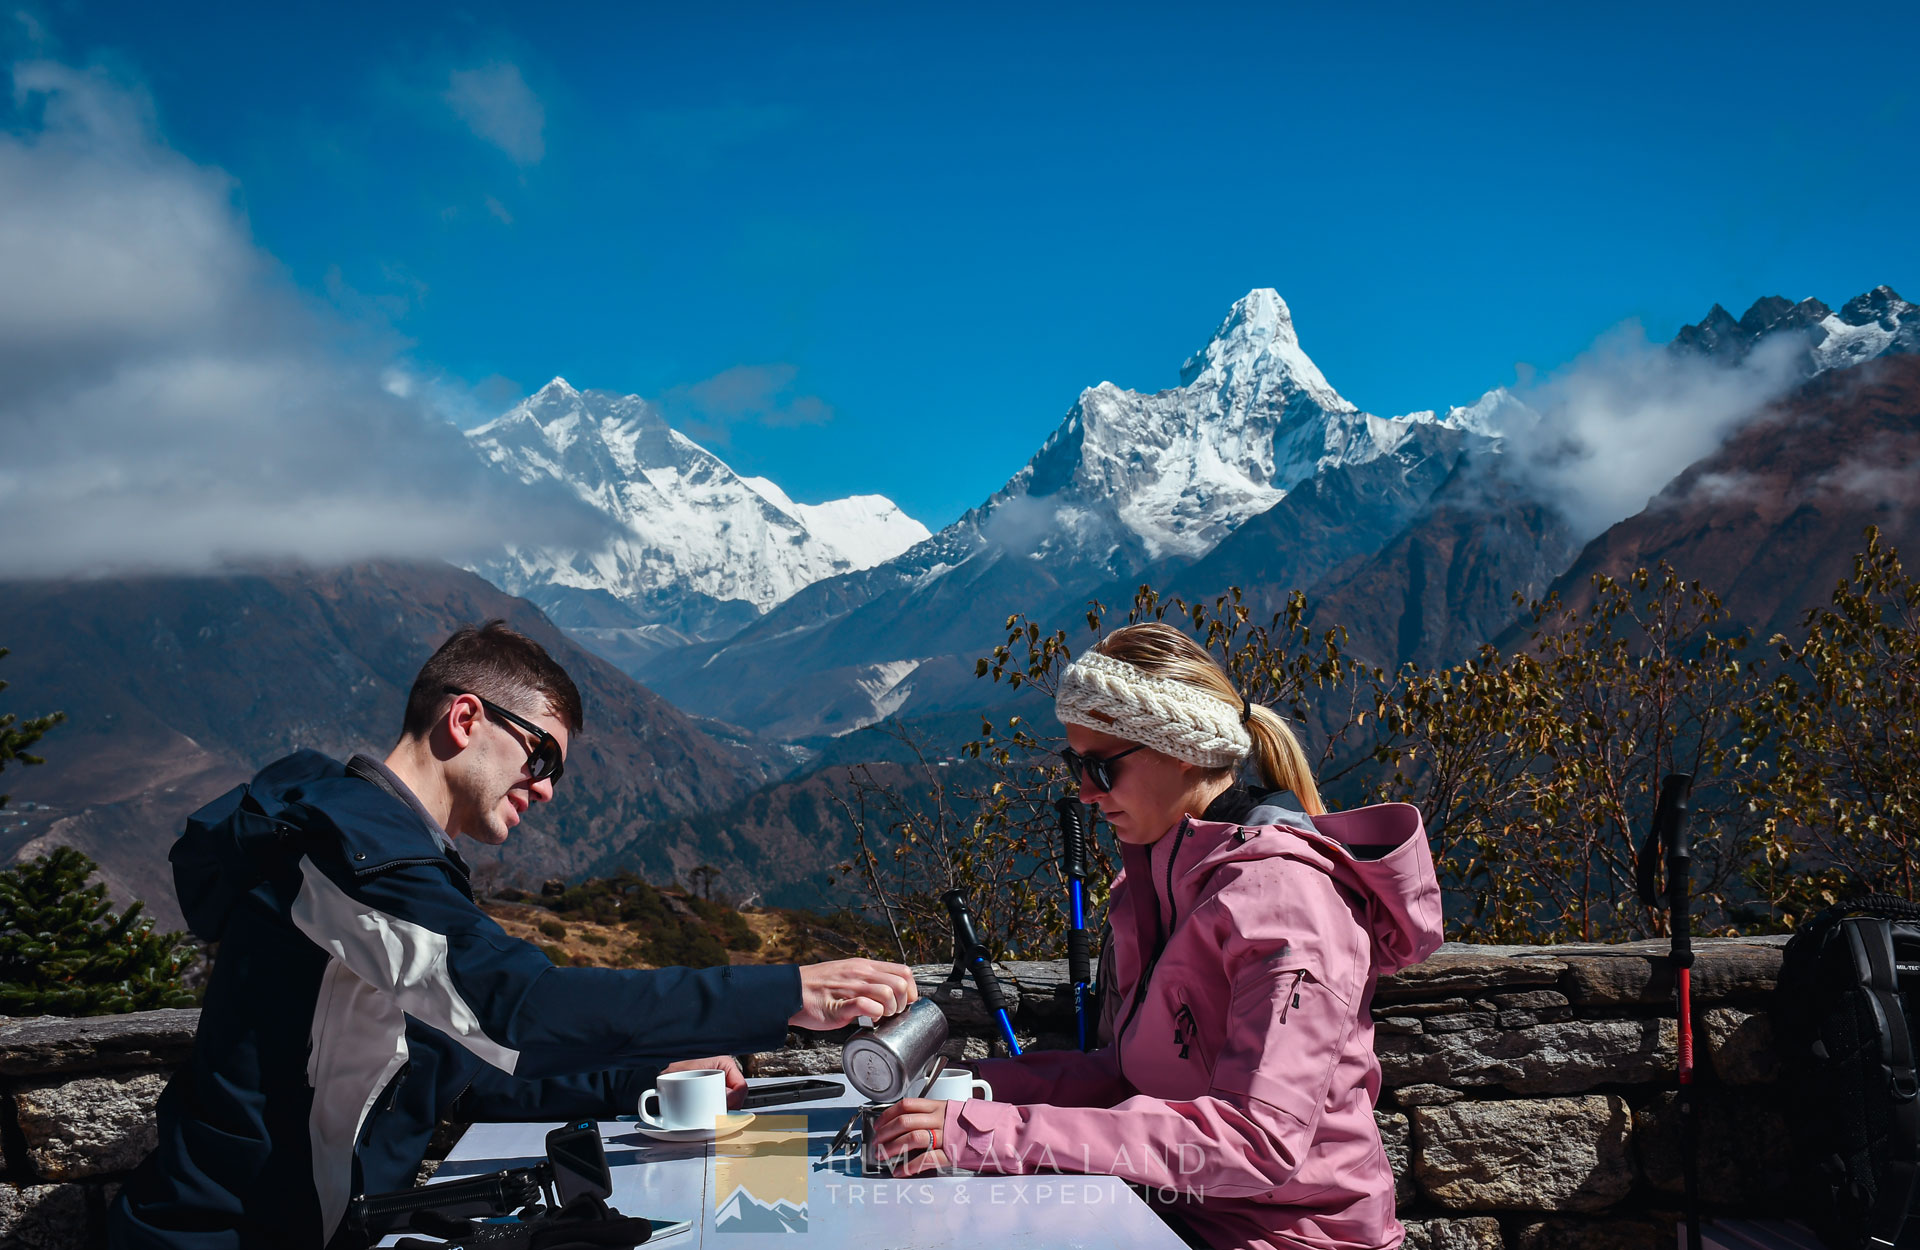 Savoring Serenity: Indulging in a Cup of Tea at Everest View Hotel